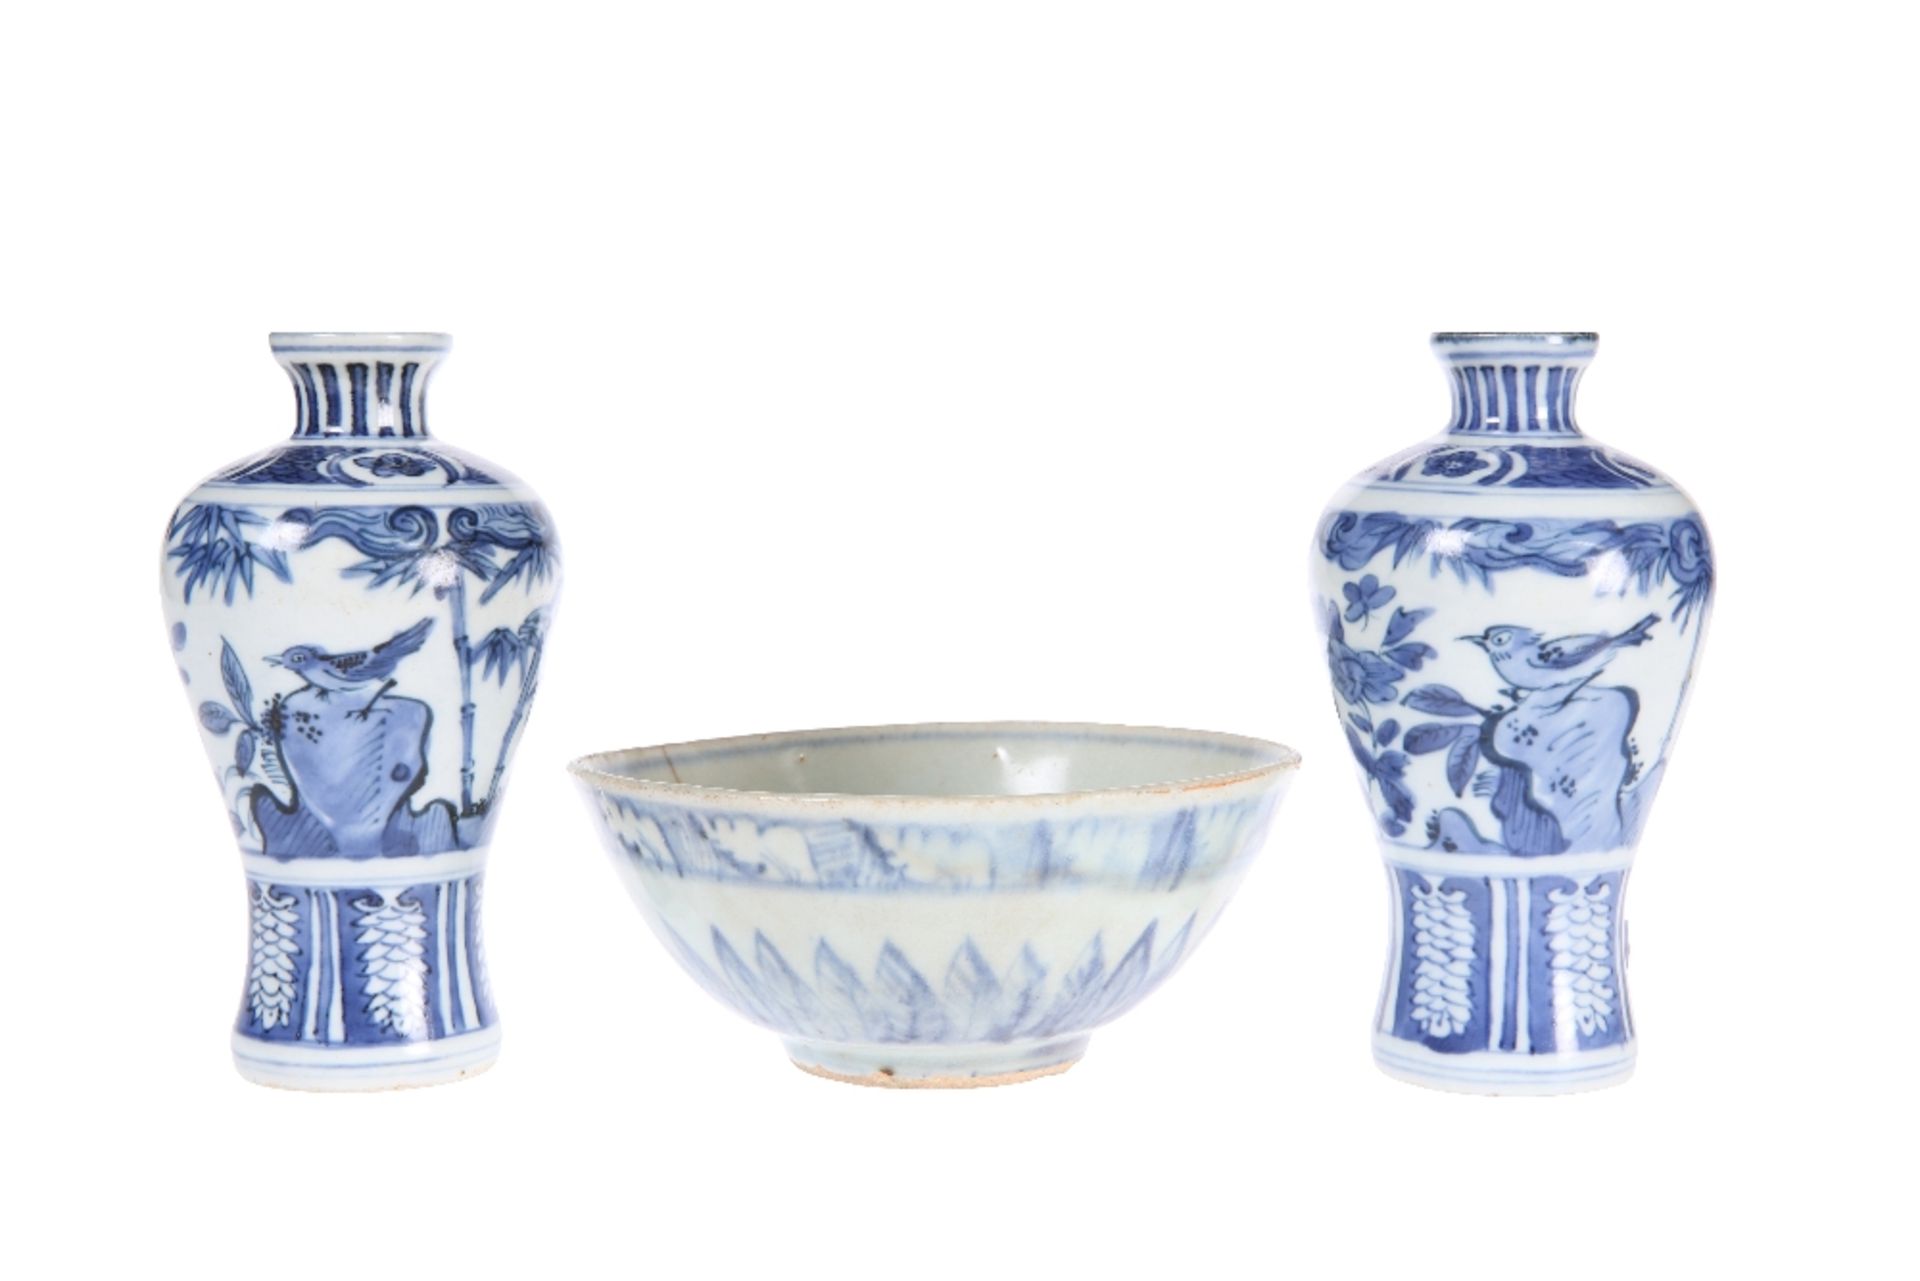 A PAIR OF CHINESE BLUE AND WHITE PORCELAIN VASES